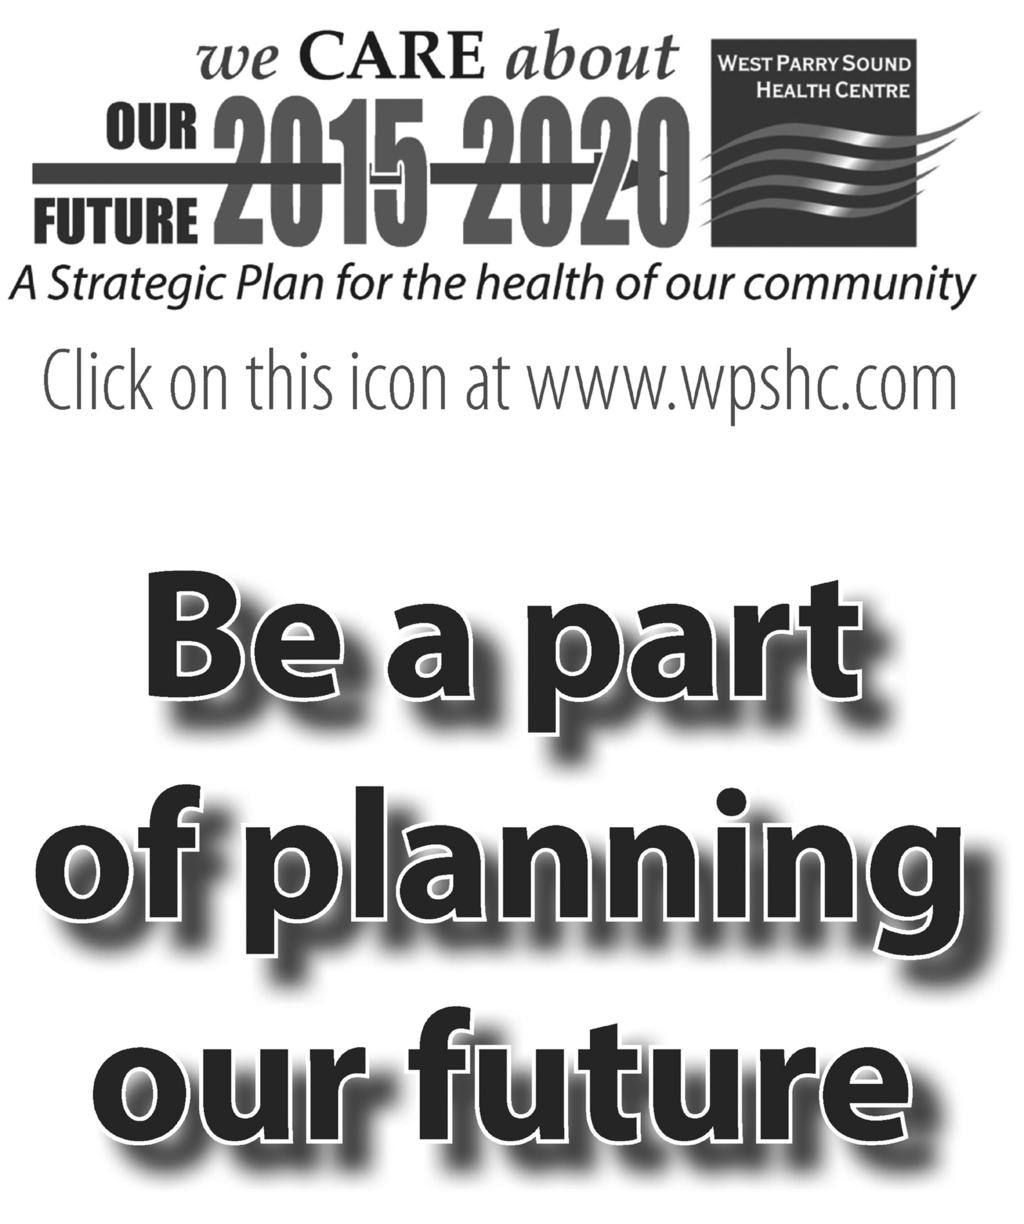 We now need to create a new strategic plan and we are asking for your help. Please offer your opinion. Join us in preparing for the future delivery of health care services in our community.